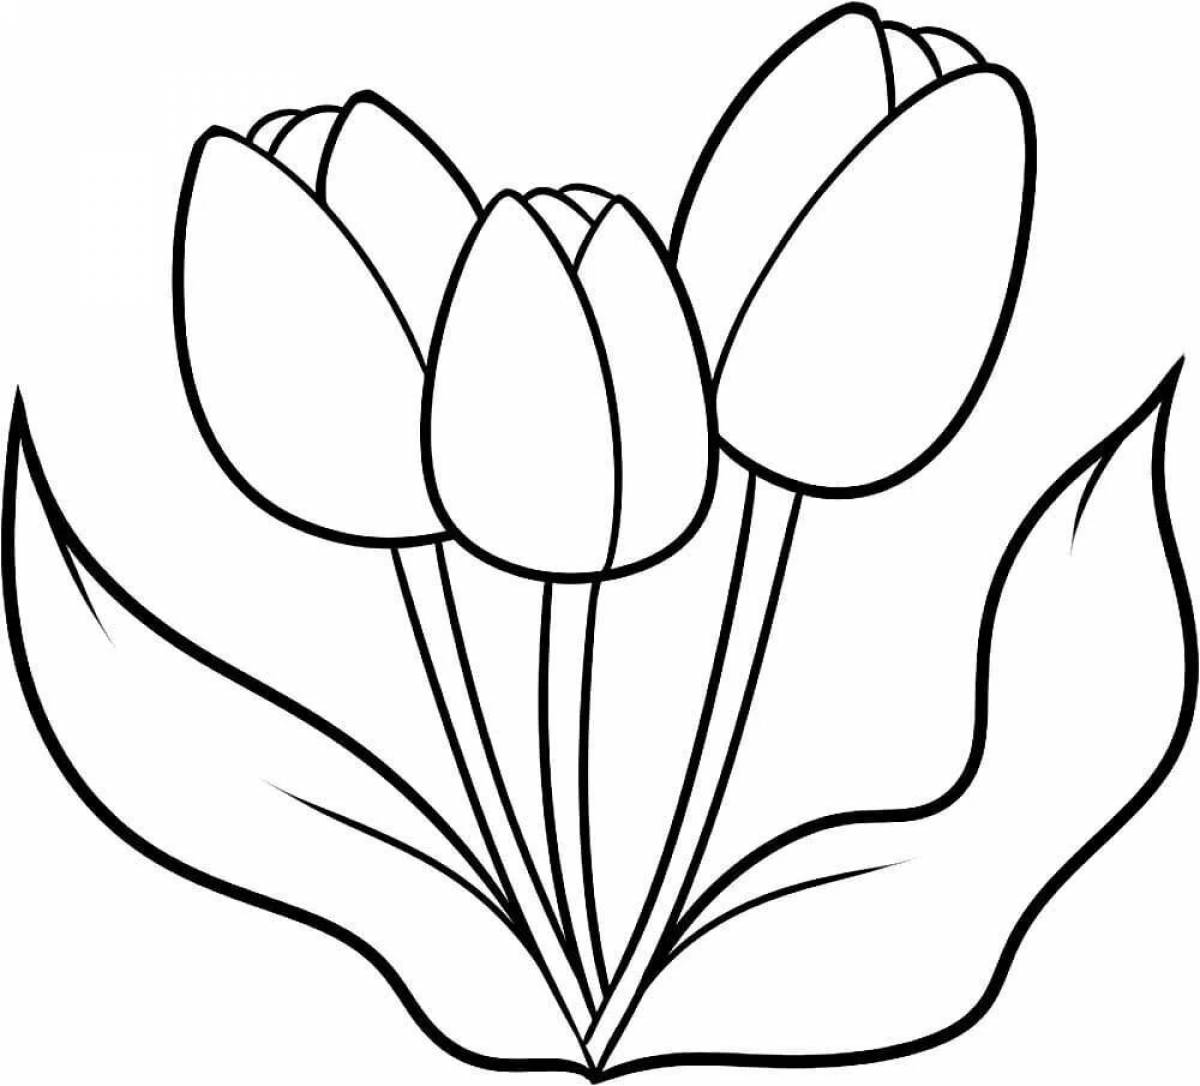 Fine tulips coloring for little students